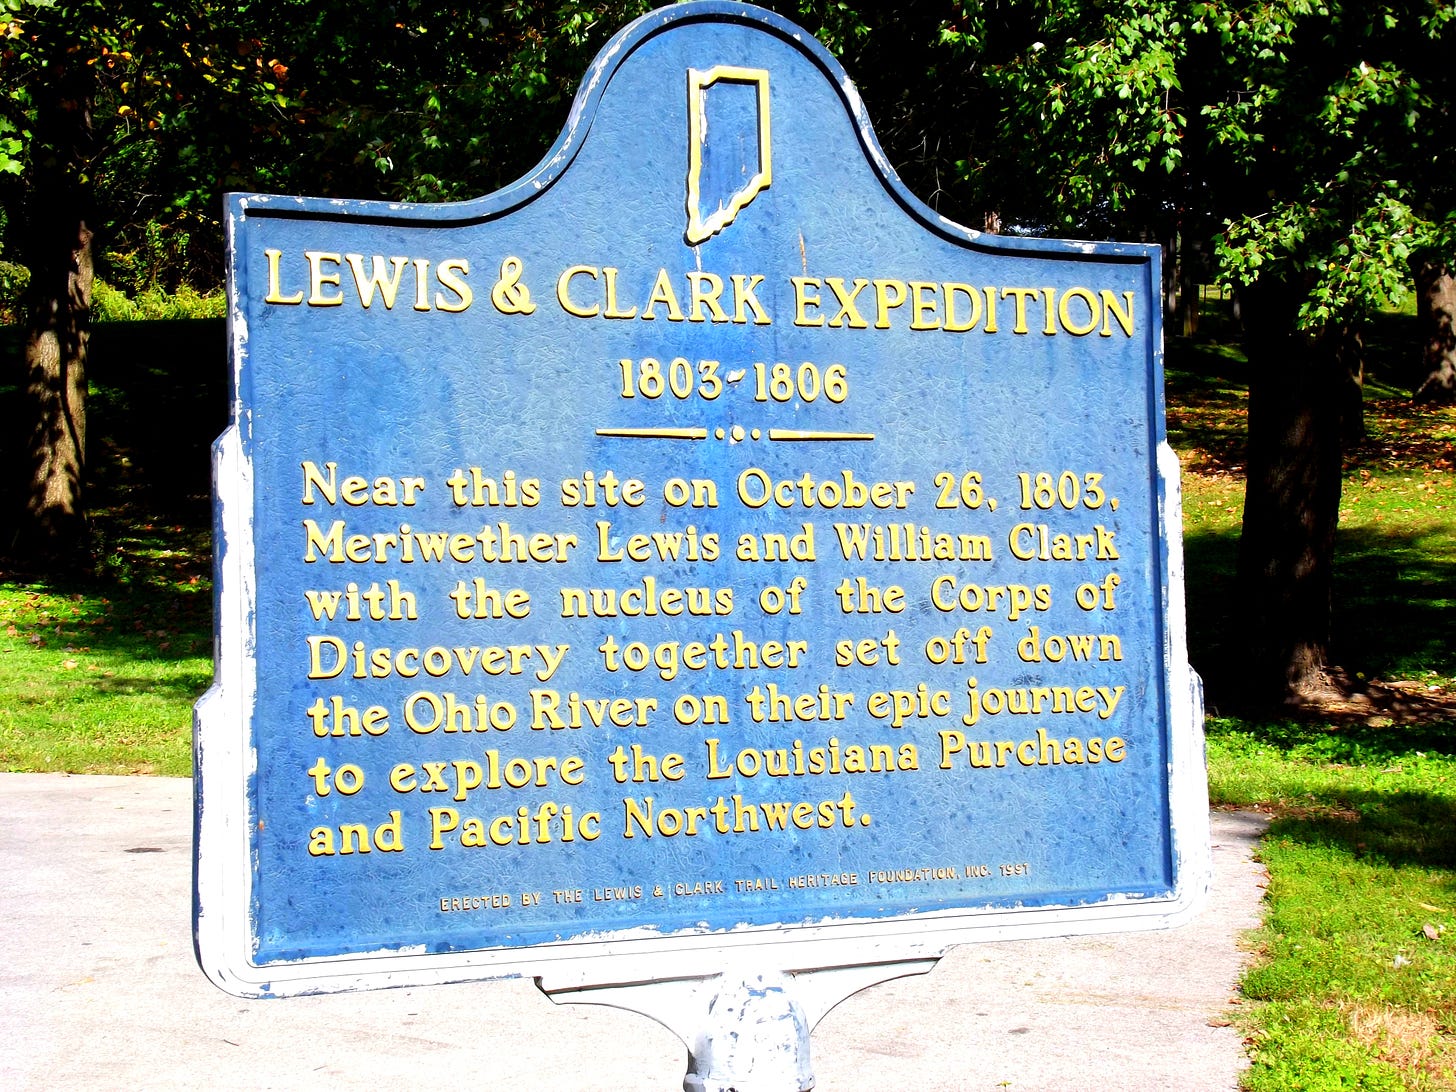 Lewis and Clark Expedition Historical Marker in Clarksville, Indiana - Falls of the Ohio State Park